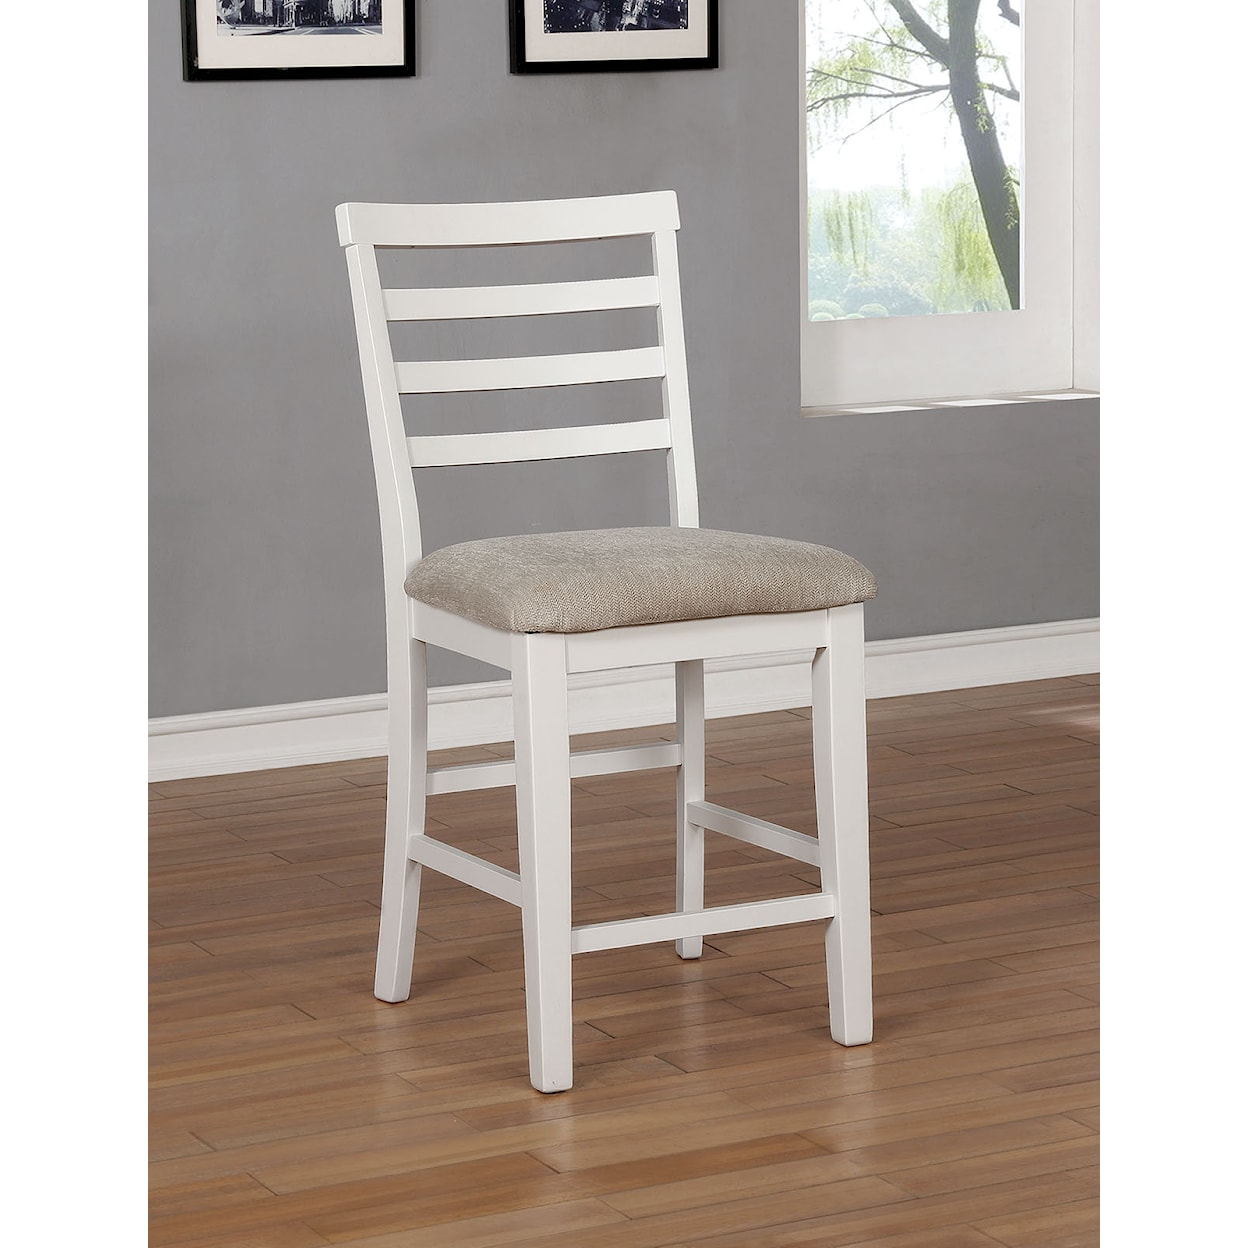 Furniture of America Kiana Upholstered Counter Height Side Chair